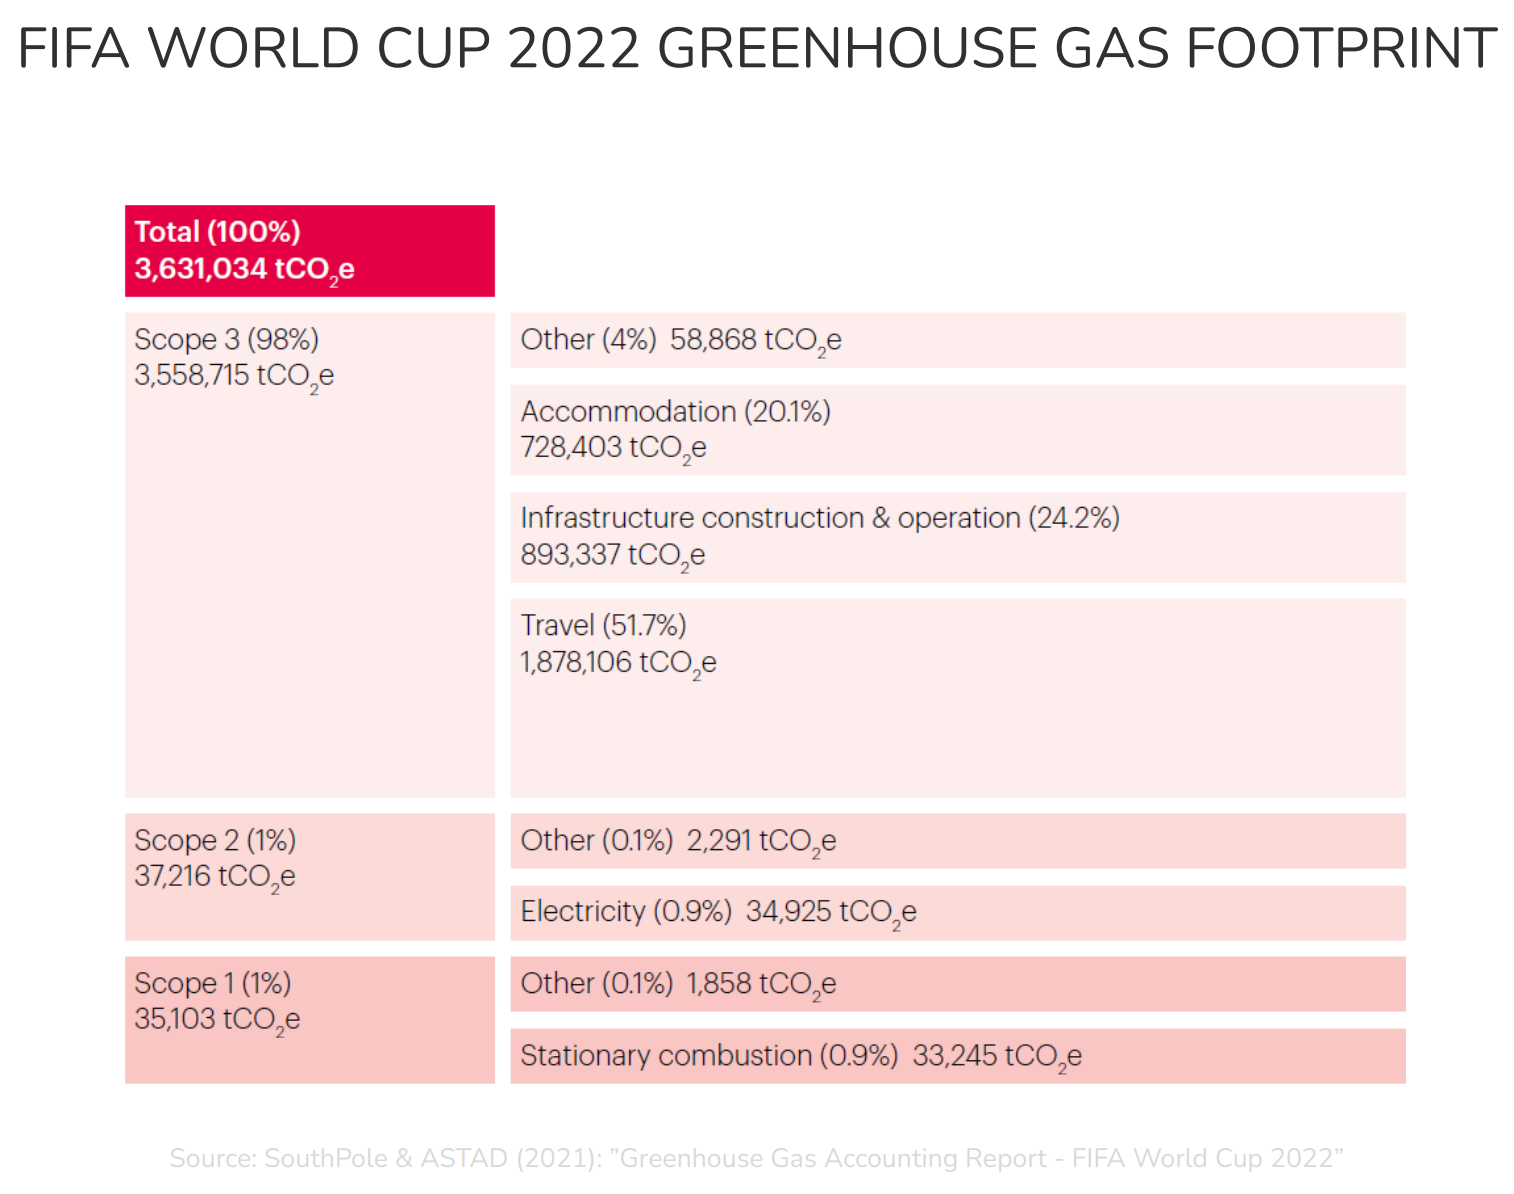 FIFA World Cup 2022 greenhouse gas footprint. Data: SouthPole and ASTAD, 2021: “Greenhouse Gas Accounting Report - FIFA World Cup 2022”. A major source of emissions that appears to have been underestimated is the construction of infrastructure, in particular the new stadiums. Due to the chosen accounting approach, the construction of permanent new stadiums has been allocated a very small volume of emissions – 206ktCO2e (kilotonnes of carbon dioxide equivalent) – equivalent to only 5.5 percent of the tournament’s total emissions. Graphic: Carbon Market Watch